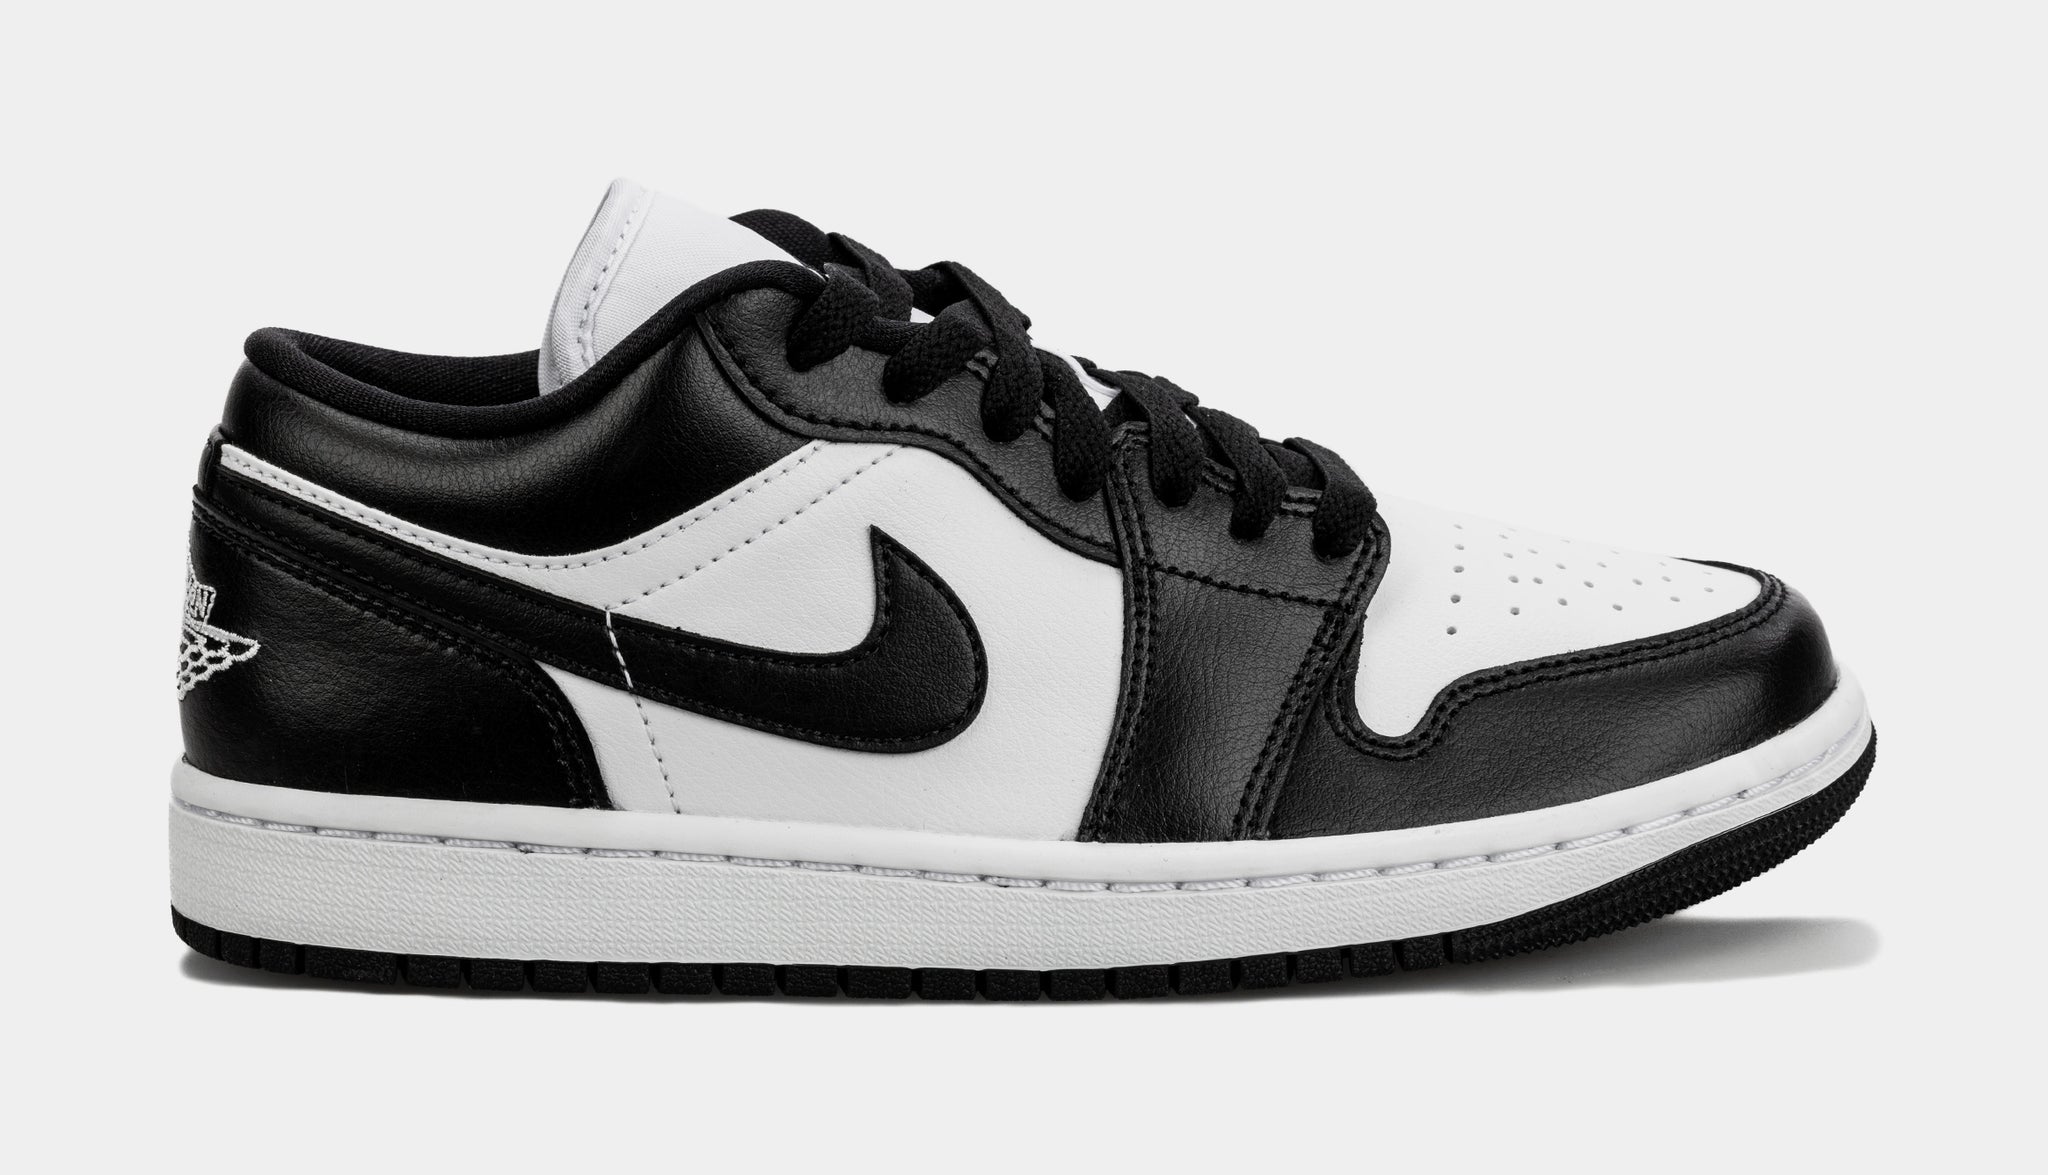 Five best black Air Jordan 1 sneakers that are a must-have